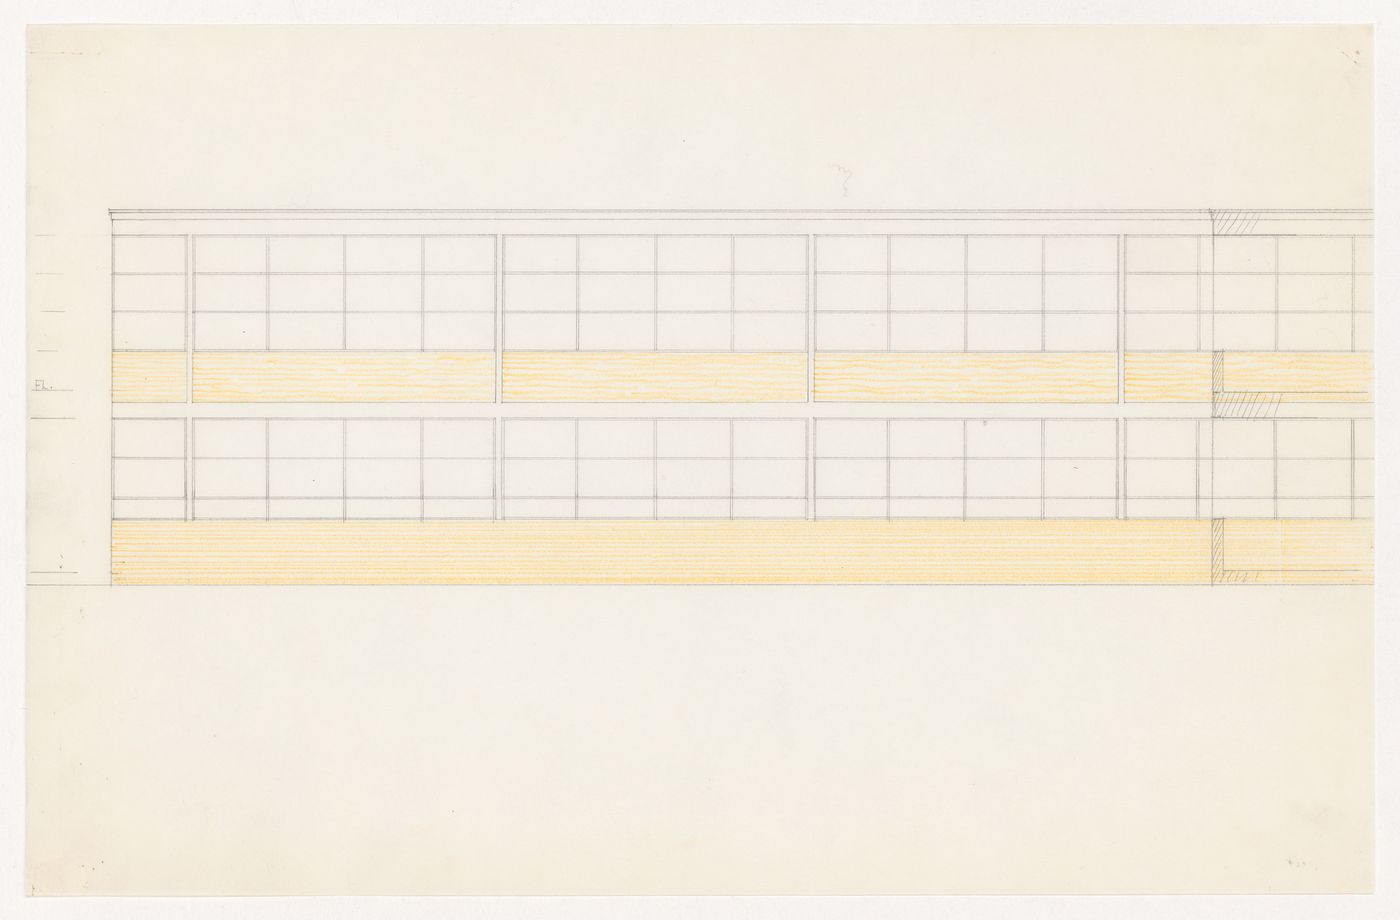 Partial elevation for the Metallurgy Building, Illinois Institute of Technology, Chicago